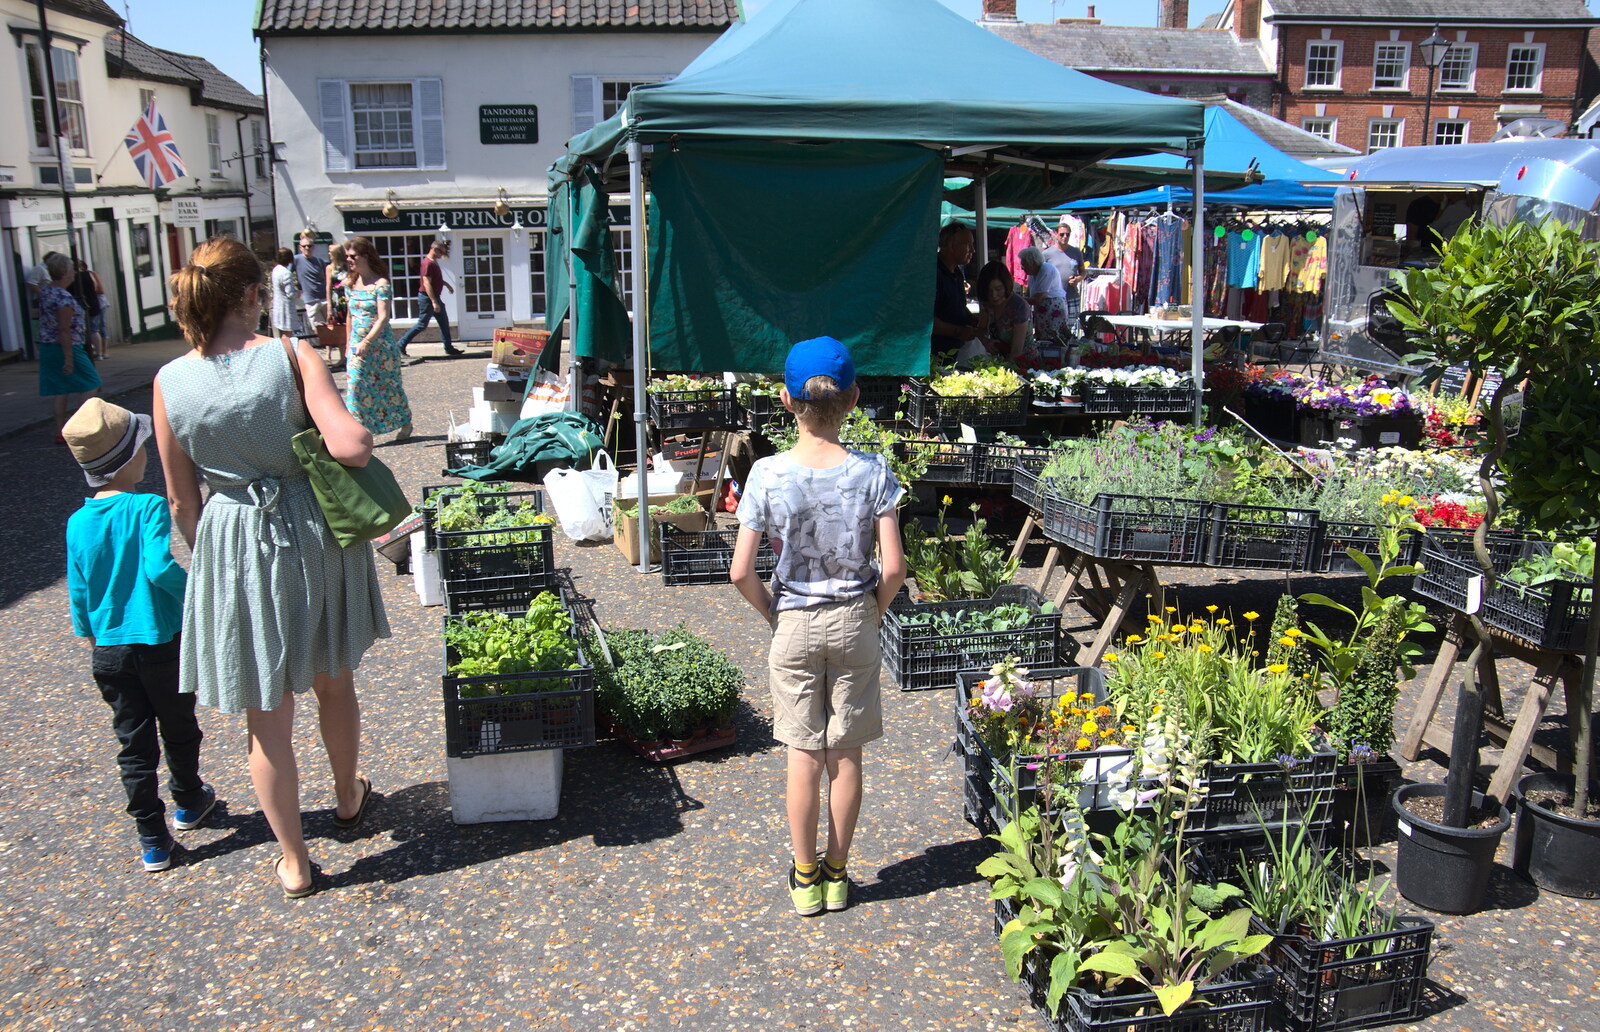 Harry, Isobel and Fred at Framlingham Market from A Postcard from the Castle on the Hill, Framlingham, Suffolk - 14th July 2018